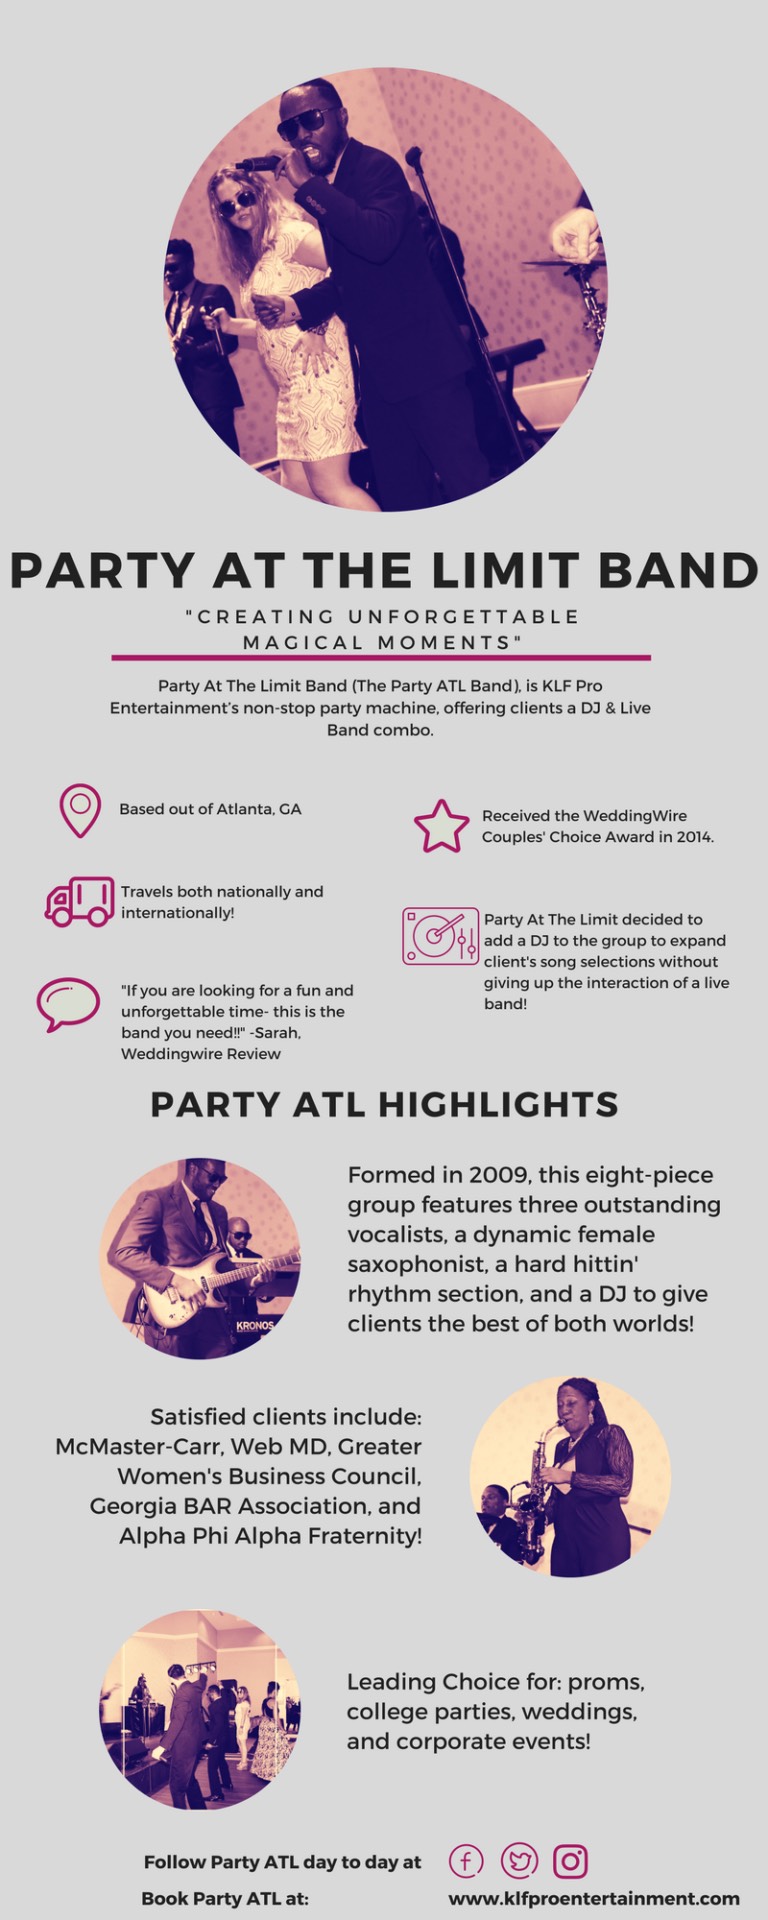 Party at the limit band infographic